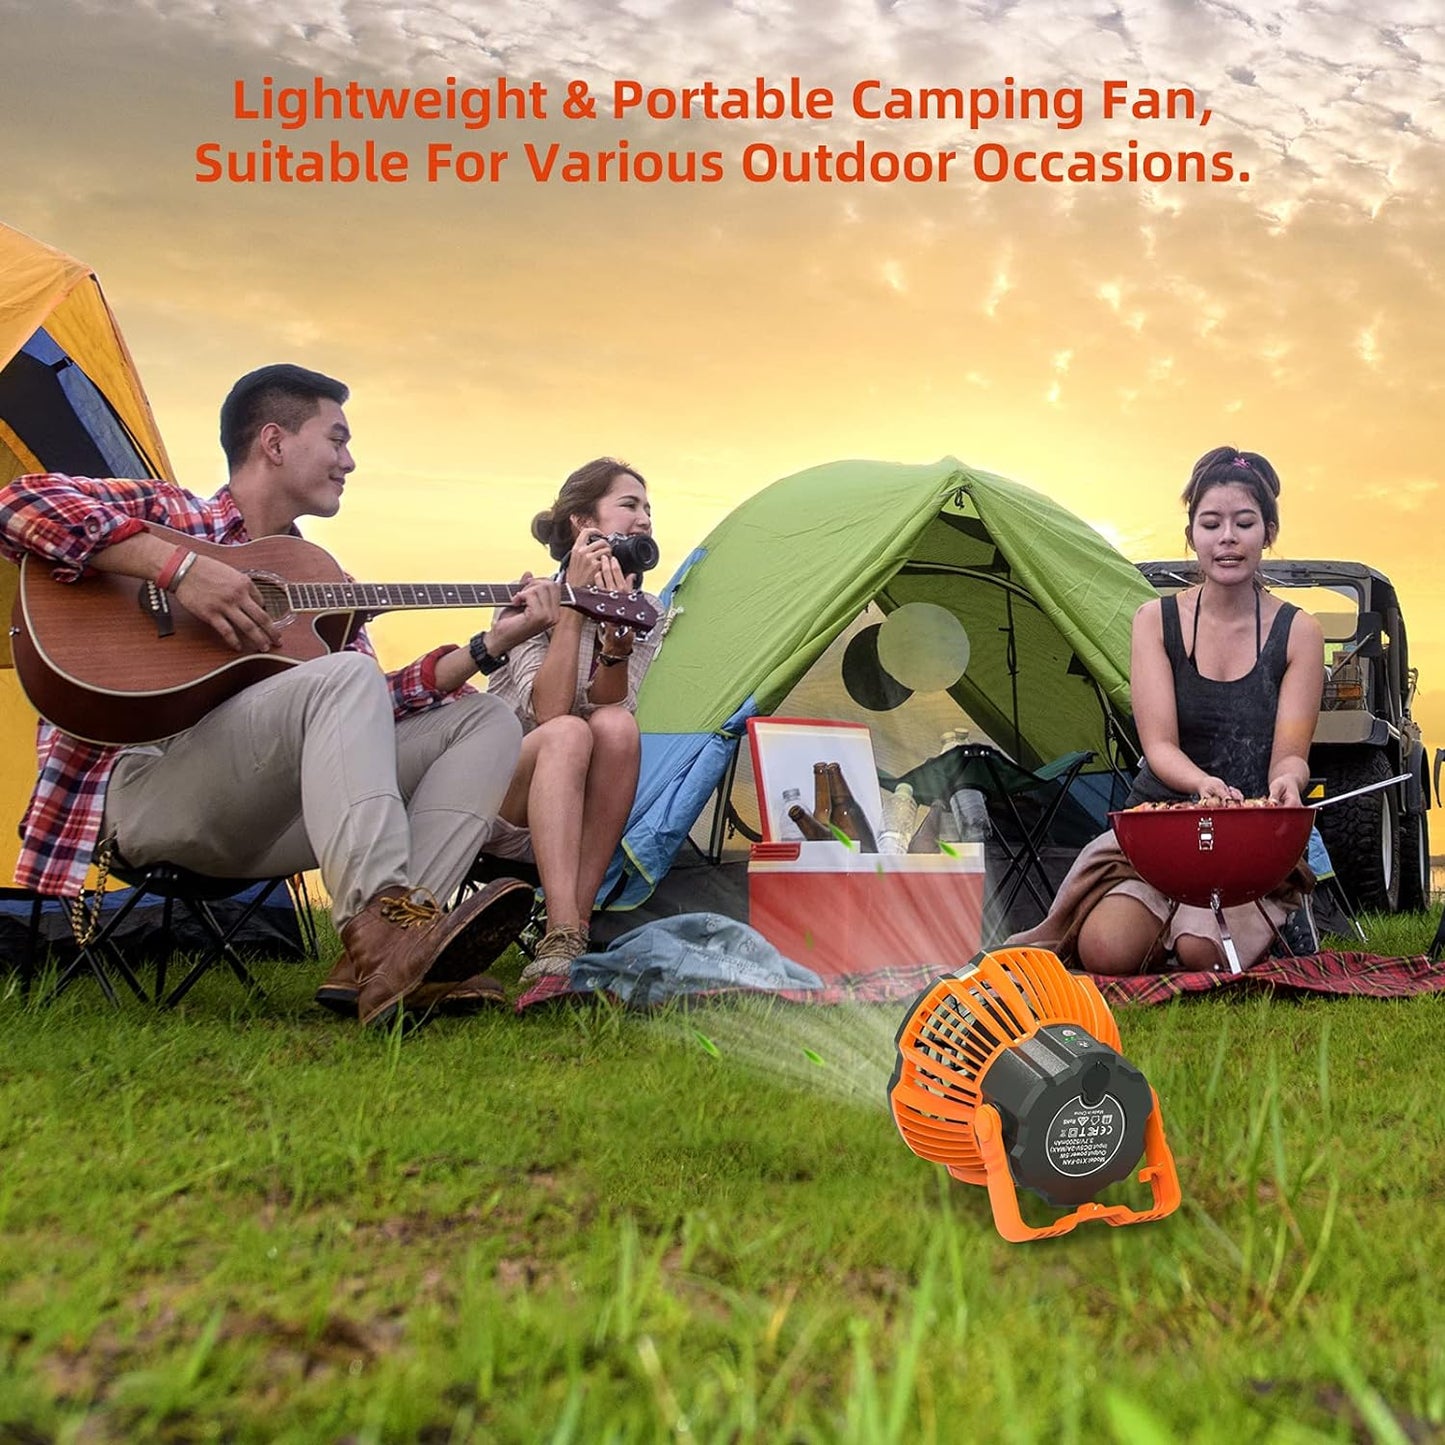 Portable Camping Lantern, Rechargeable USB Ceiling Tent Fan with Remote Control, Quiet and Powerful USB Personal Fan for Outdoor